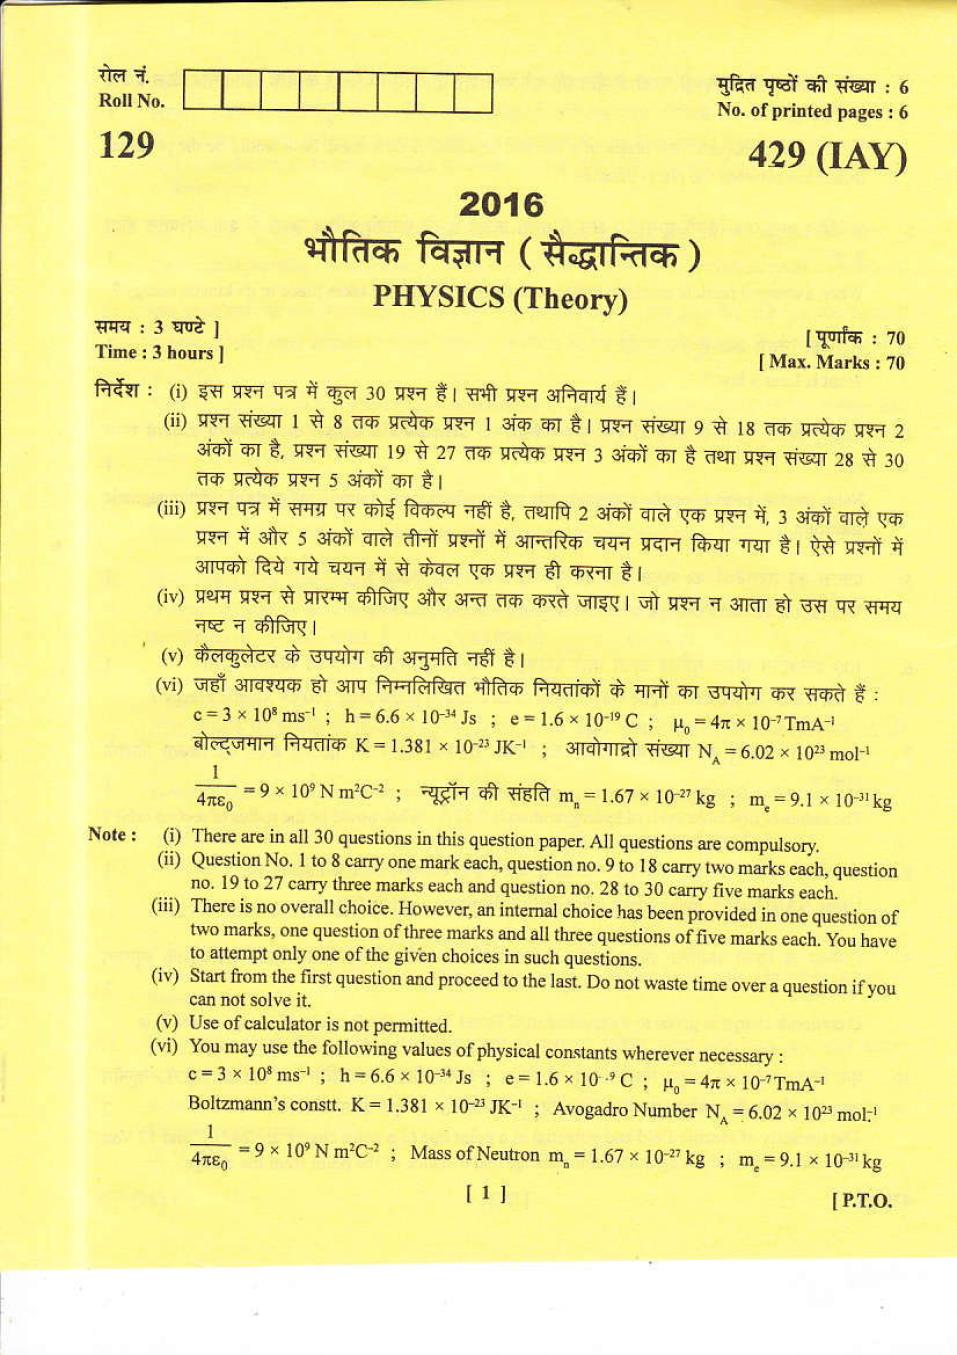 Uttarakhand Board Class 12 Question Paper 2016 for Physics - Page 1